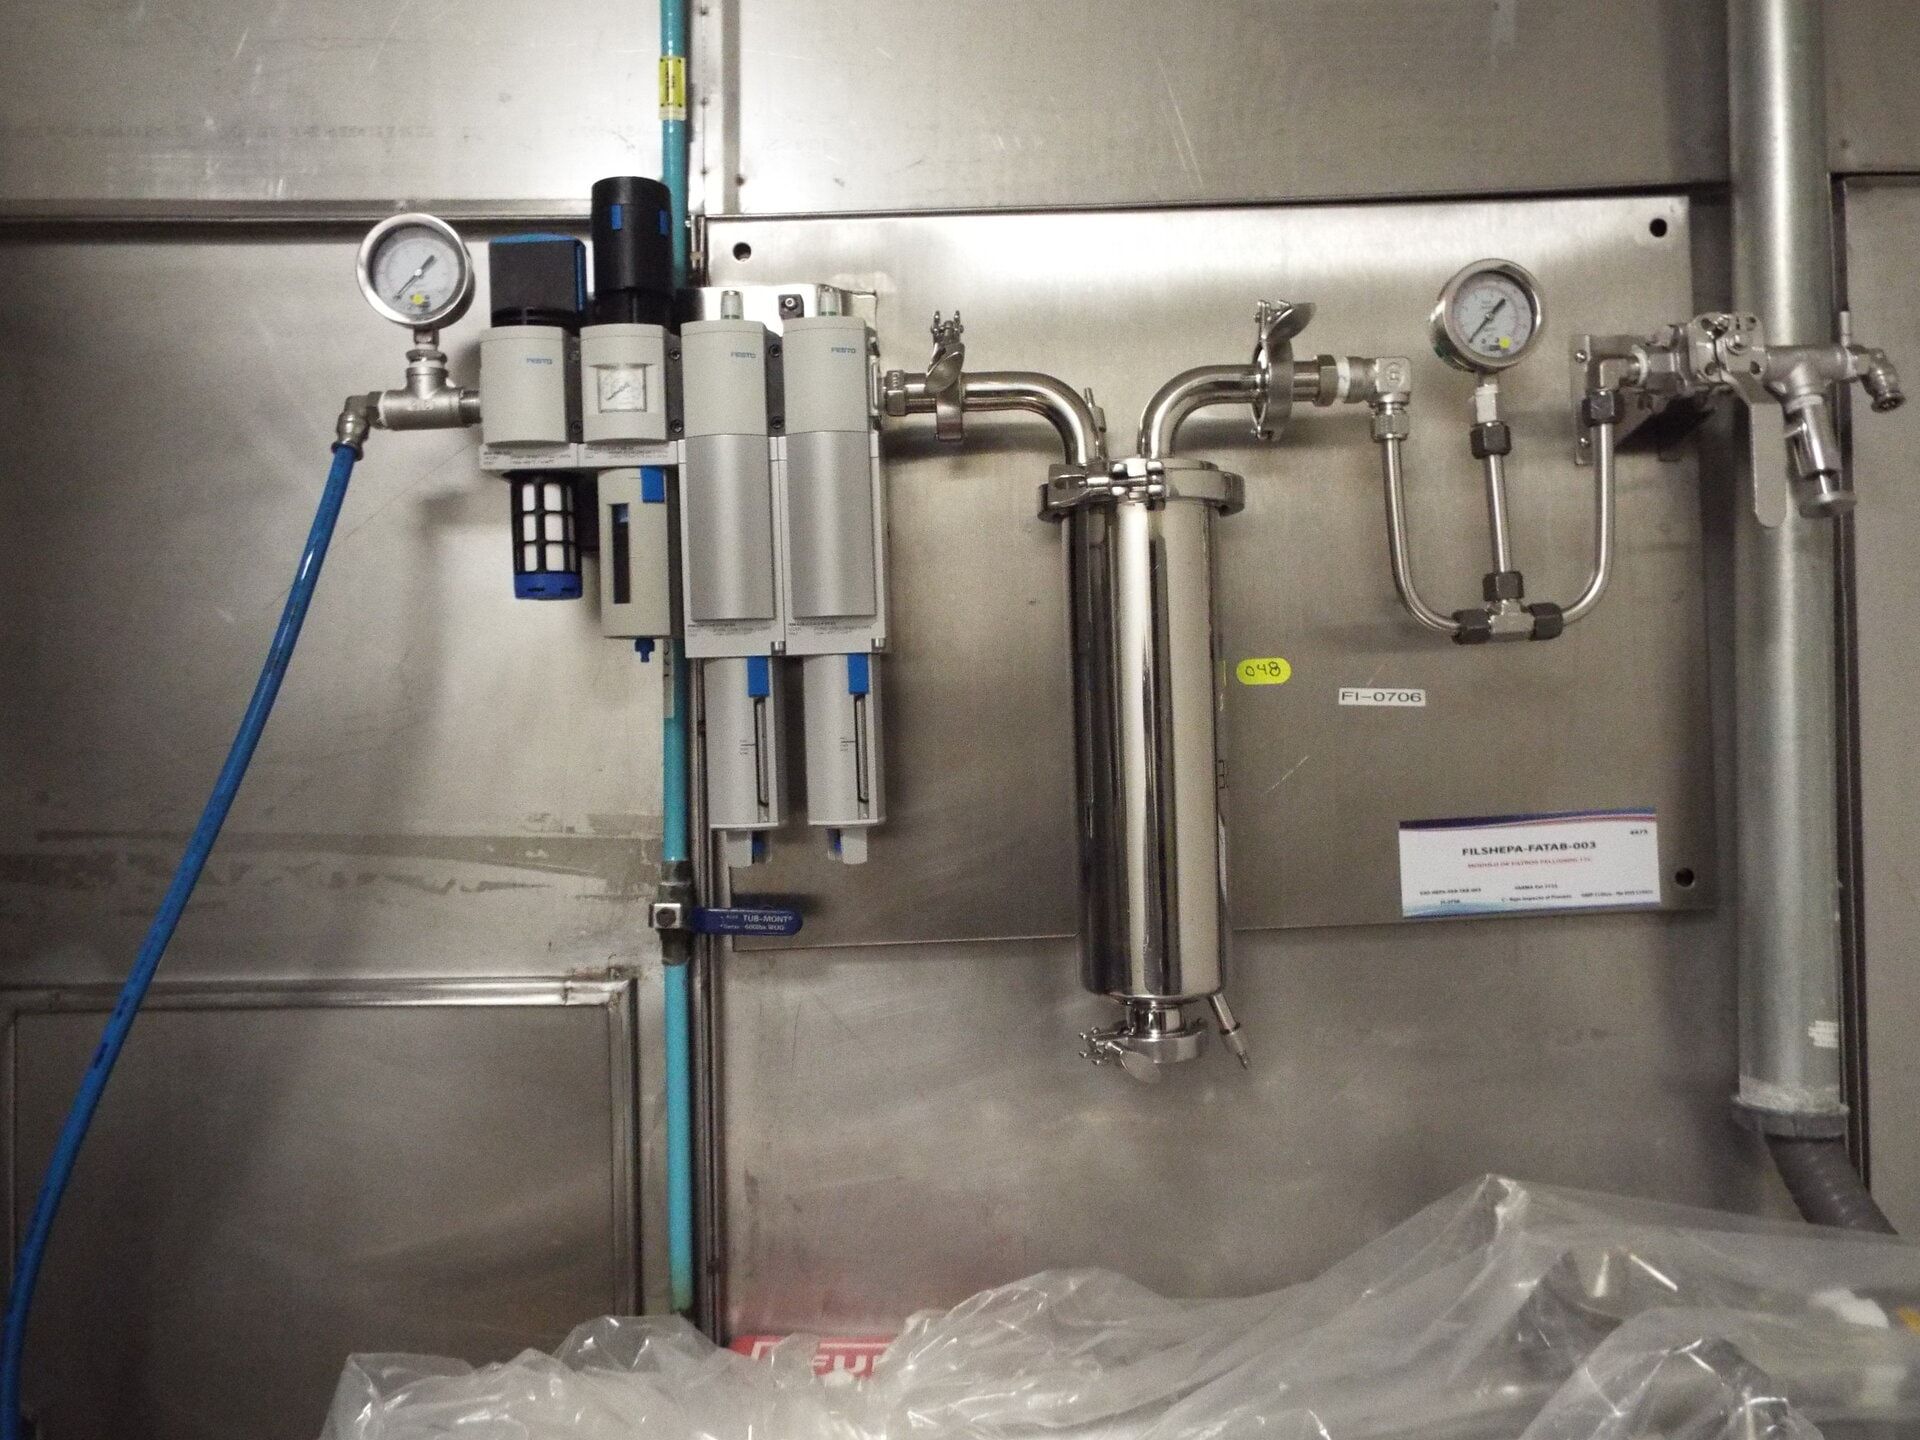 Pellegrini stainless steel 48" model HT-MT150 coating system with 2 spray pumps nozzles and cip pump - Image 11 of 17